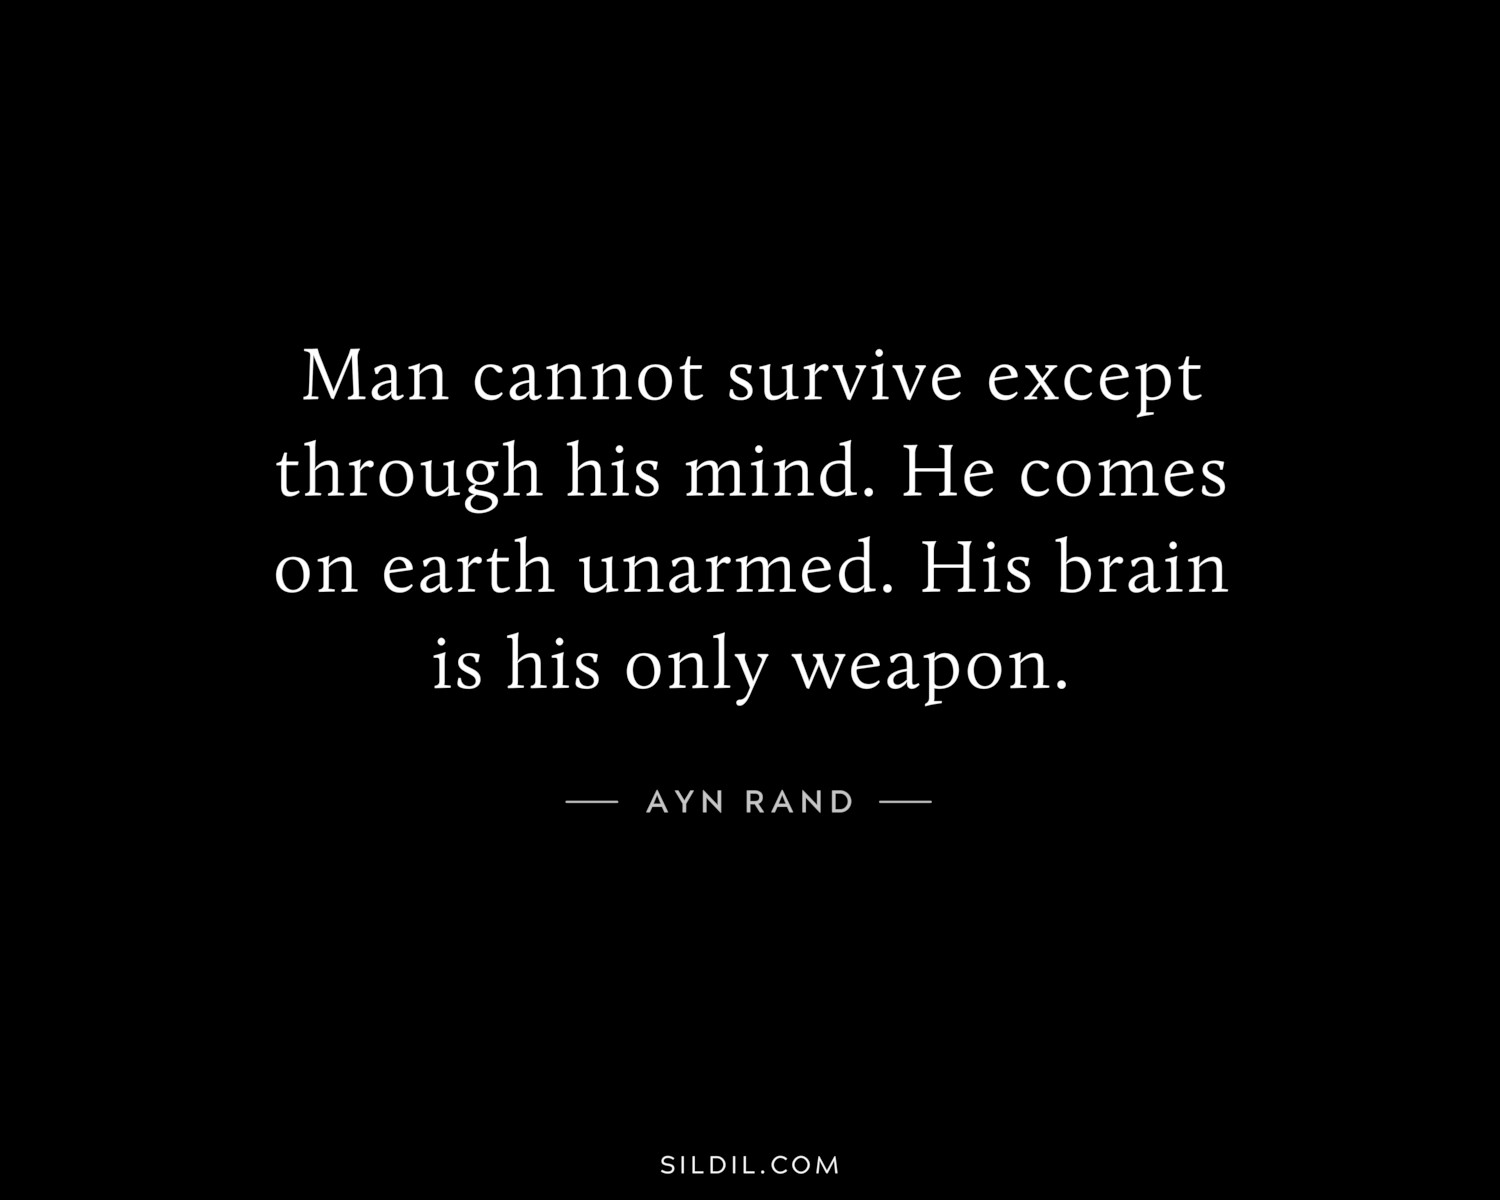 Man cannot survive except through his mind. He comes on earth unarmed. His brain is his only weapon.